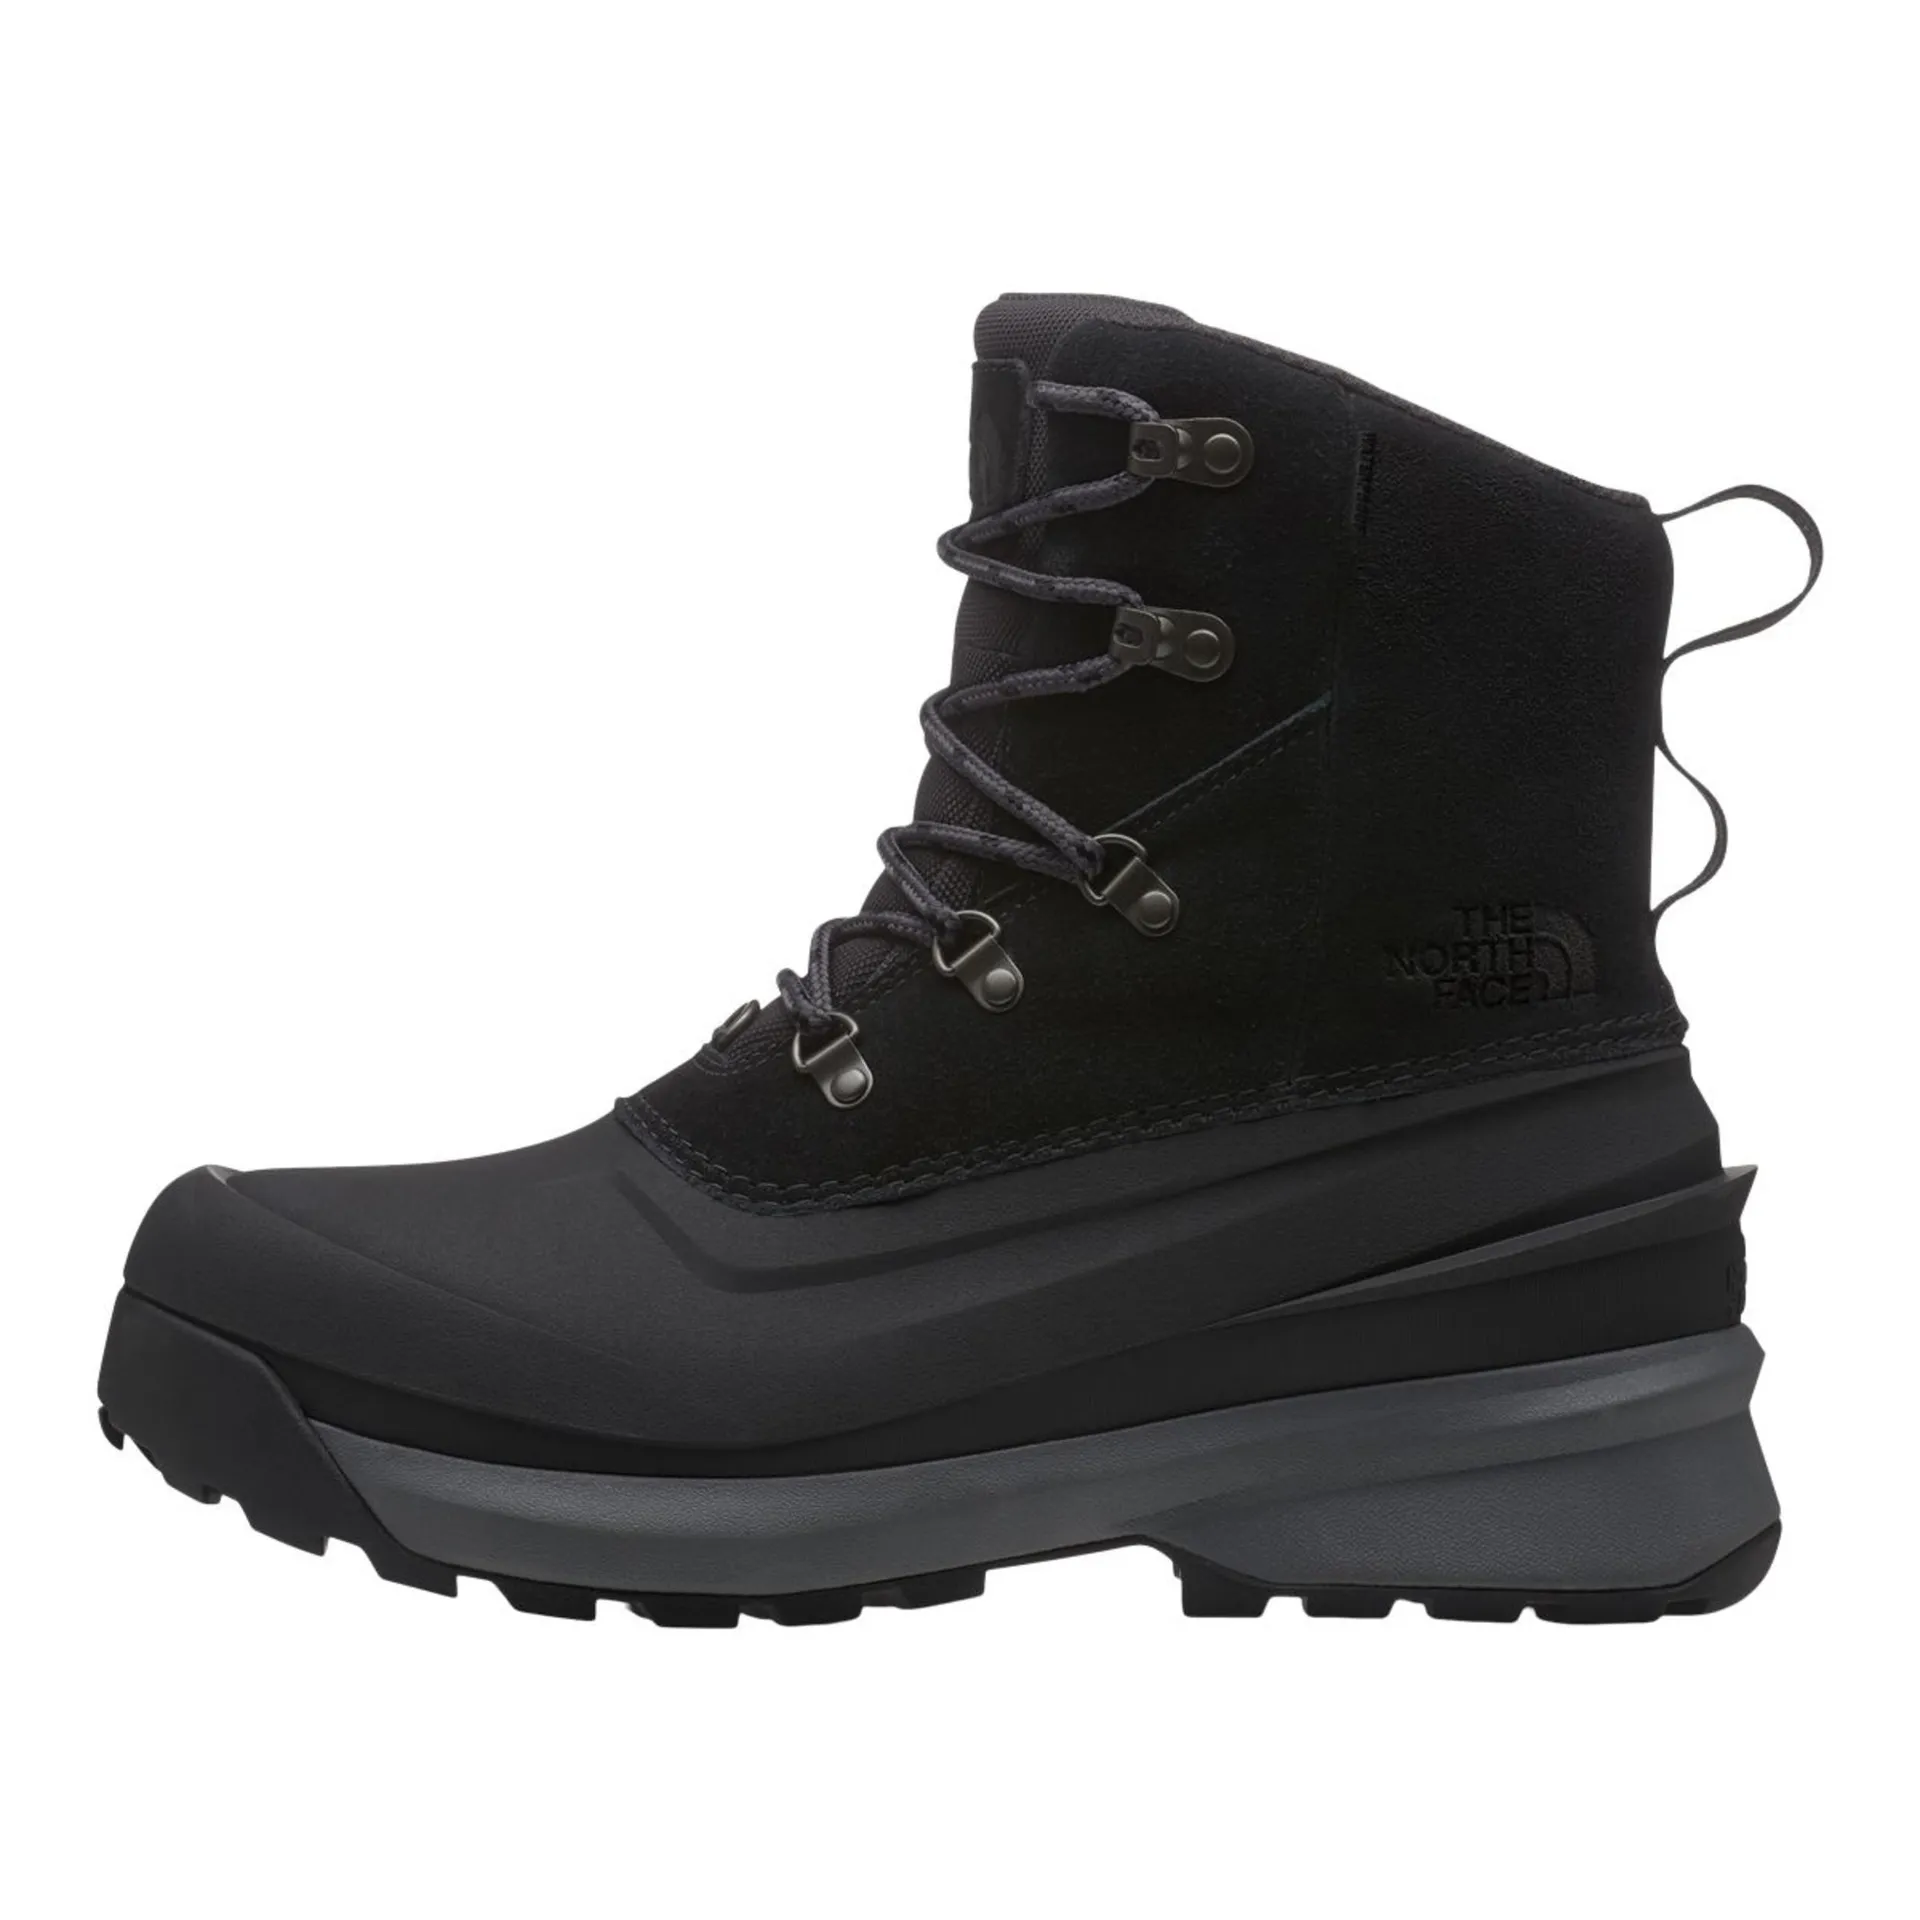 The North Face Men's Chilkat V Lace Insulated Waterproof Winter Boots